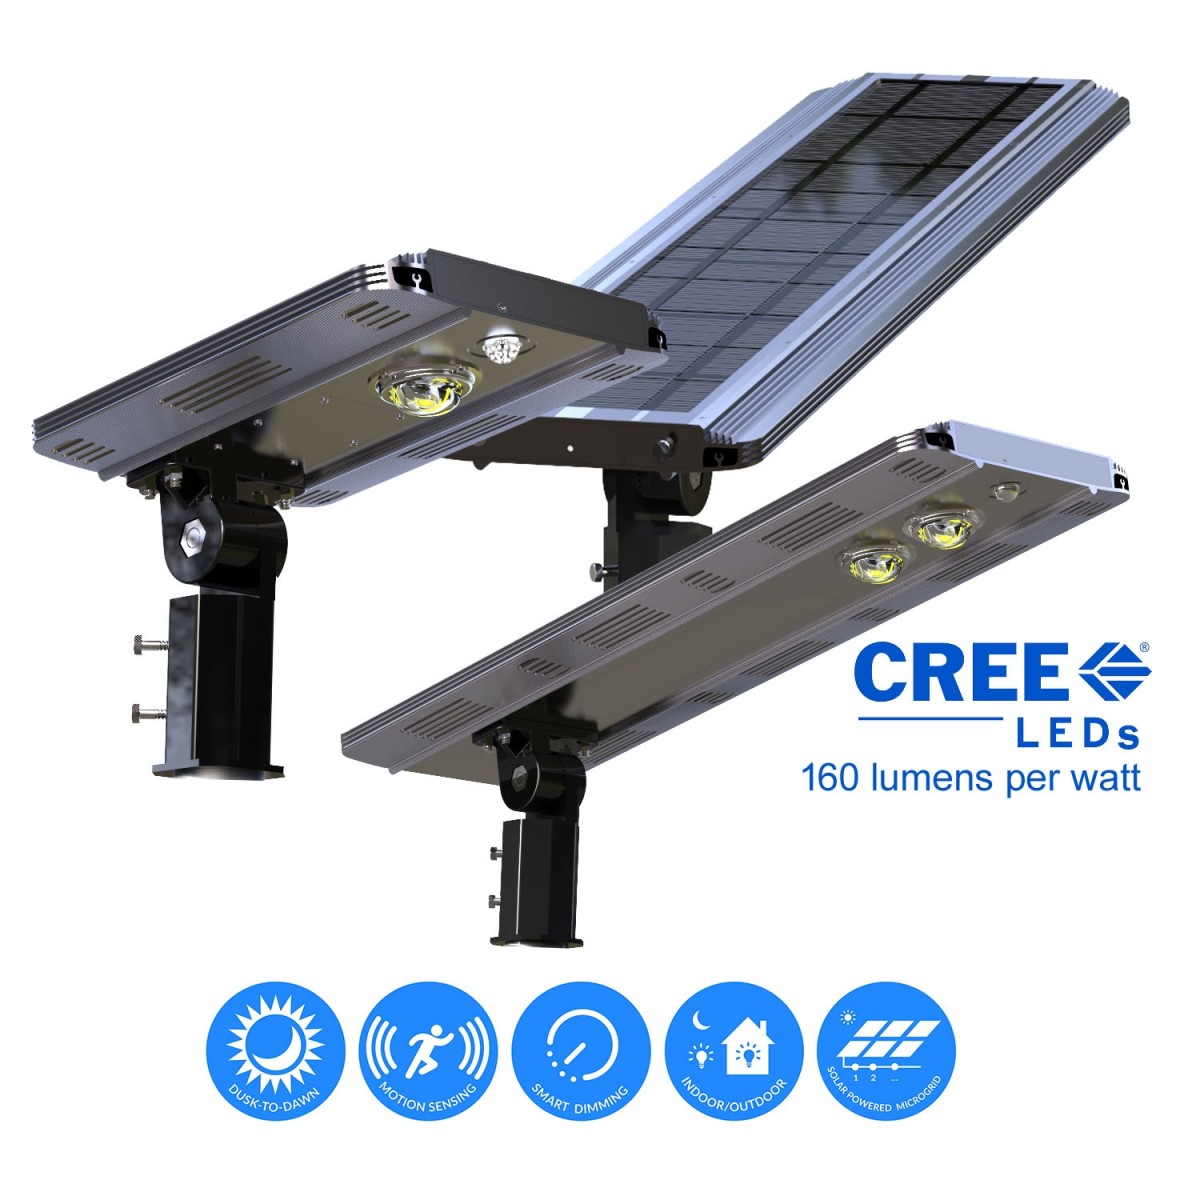 Ee810w-sh10 Solar Power Smart Cree Led Street Light For Commercial Residential Parking Bike Paths Walkways Courtyard 10w